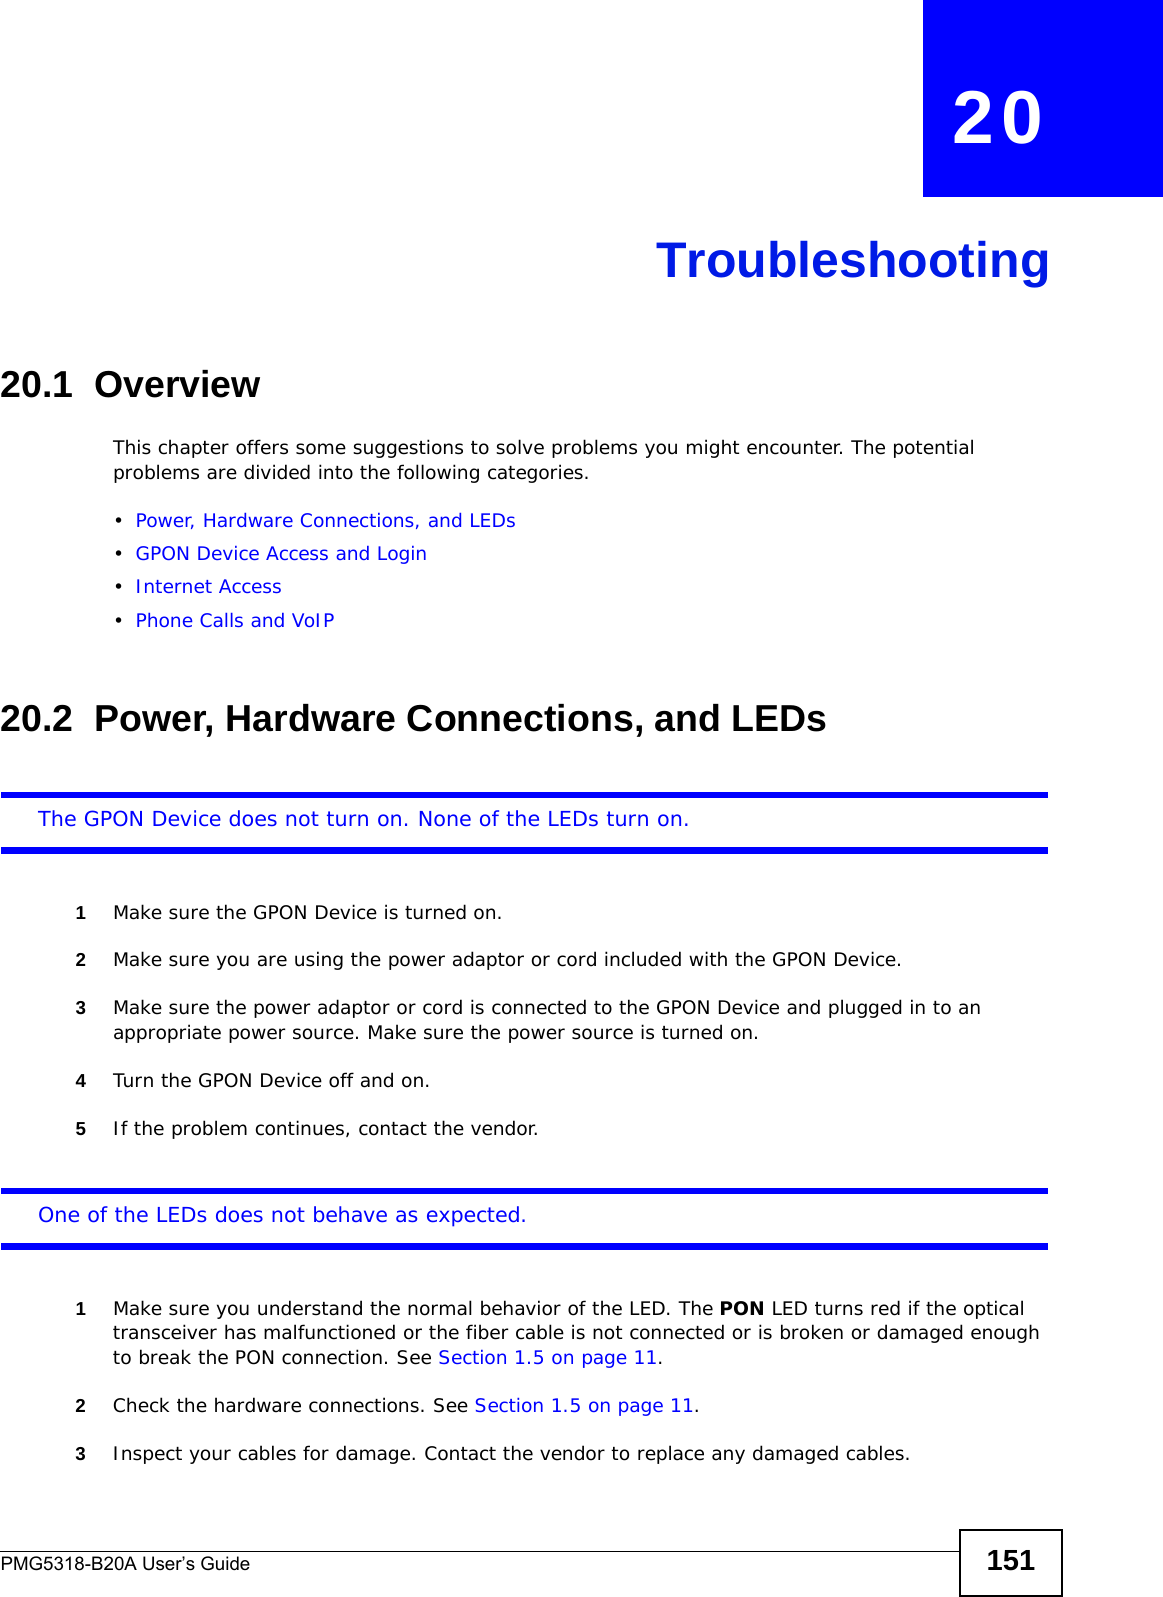 PMG5318-B20A User’s Guide 151CHAPTER   20Troubleshooting20.1  OverviewThis chapter offers some suggestions to solve problems you might encounter. The potential problems are divided into the following categories. •Power, Hardware Connections, and LEDs•GPON Device Access and Login•Internet Access•Phone Calls and VoIP20.2  Power, Hardware Connections, and LEDsThe GPON Device does not turn on. None of the LEDs turn on.1Make sure the GPON Device is turned on. 2Make sure you are using the power adaptor or cord included with the GPON Device.3Make sure the power adaptor or cord is connected to the GPON Device and plugged in to an appropriate power source. Make sure the power source is turned on.4Turn the GPON Device off and on. 5If the problem continues, contact the vendor.One of the LEDs does not behave as expected.1Make sure you understand the normal behavior of the LED. The PON LED turns red if the optical transceiver has malfunctioned or the fiber cable is not connected or is broken or damaged enough to break the PON connection. See Section 1.5 on page 11.2Check the hardware connections. See Section 1.5 on page 11. 3Inspect your cables for damage. Contact the vendor to replace any damaged cables.